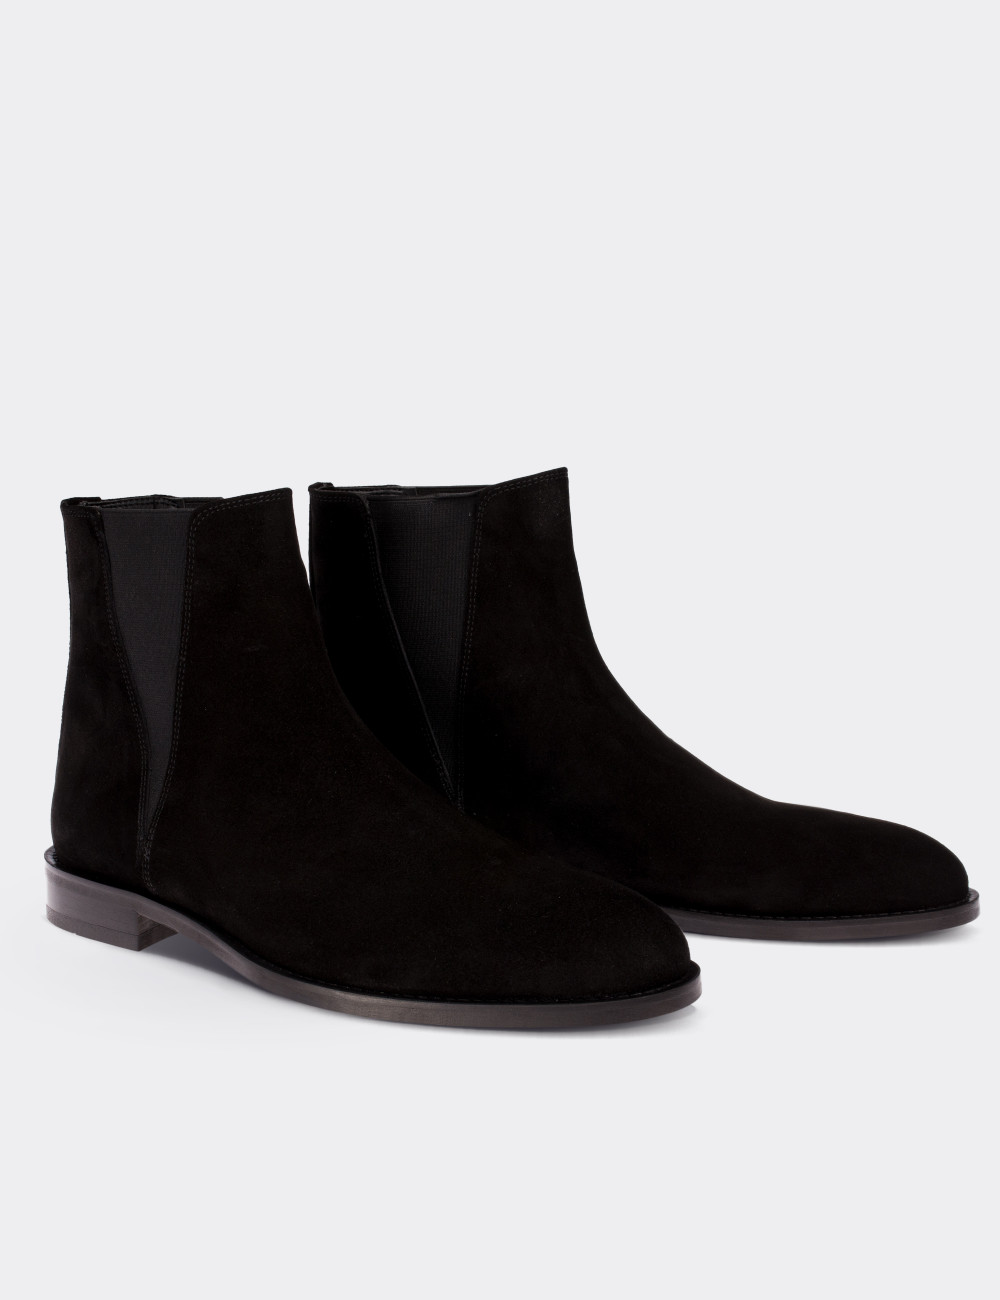 Black Suede Leather Boots - 01689MSYHM02